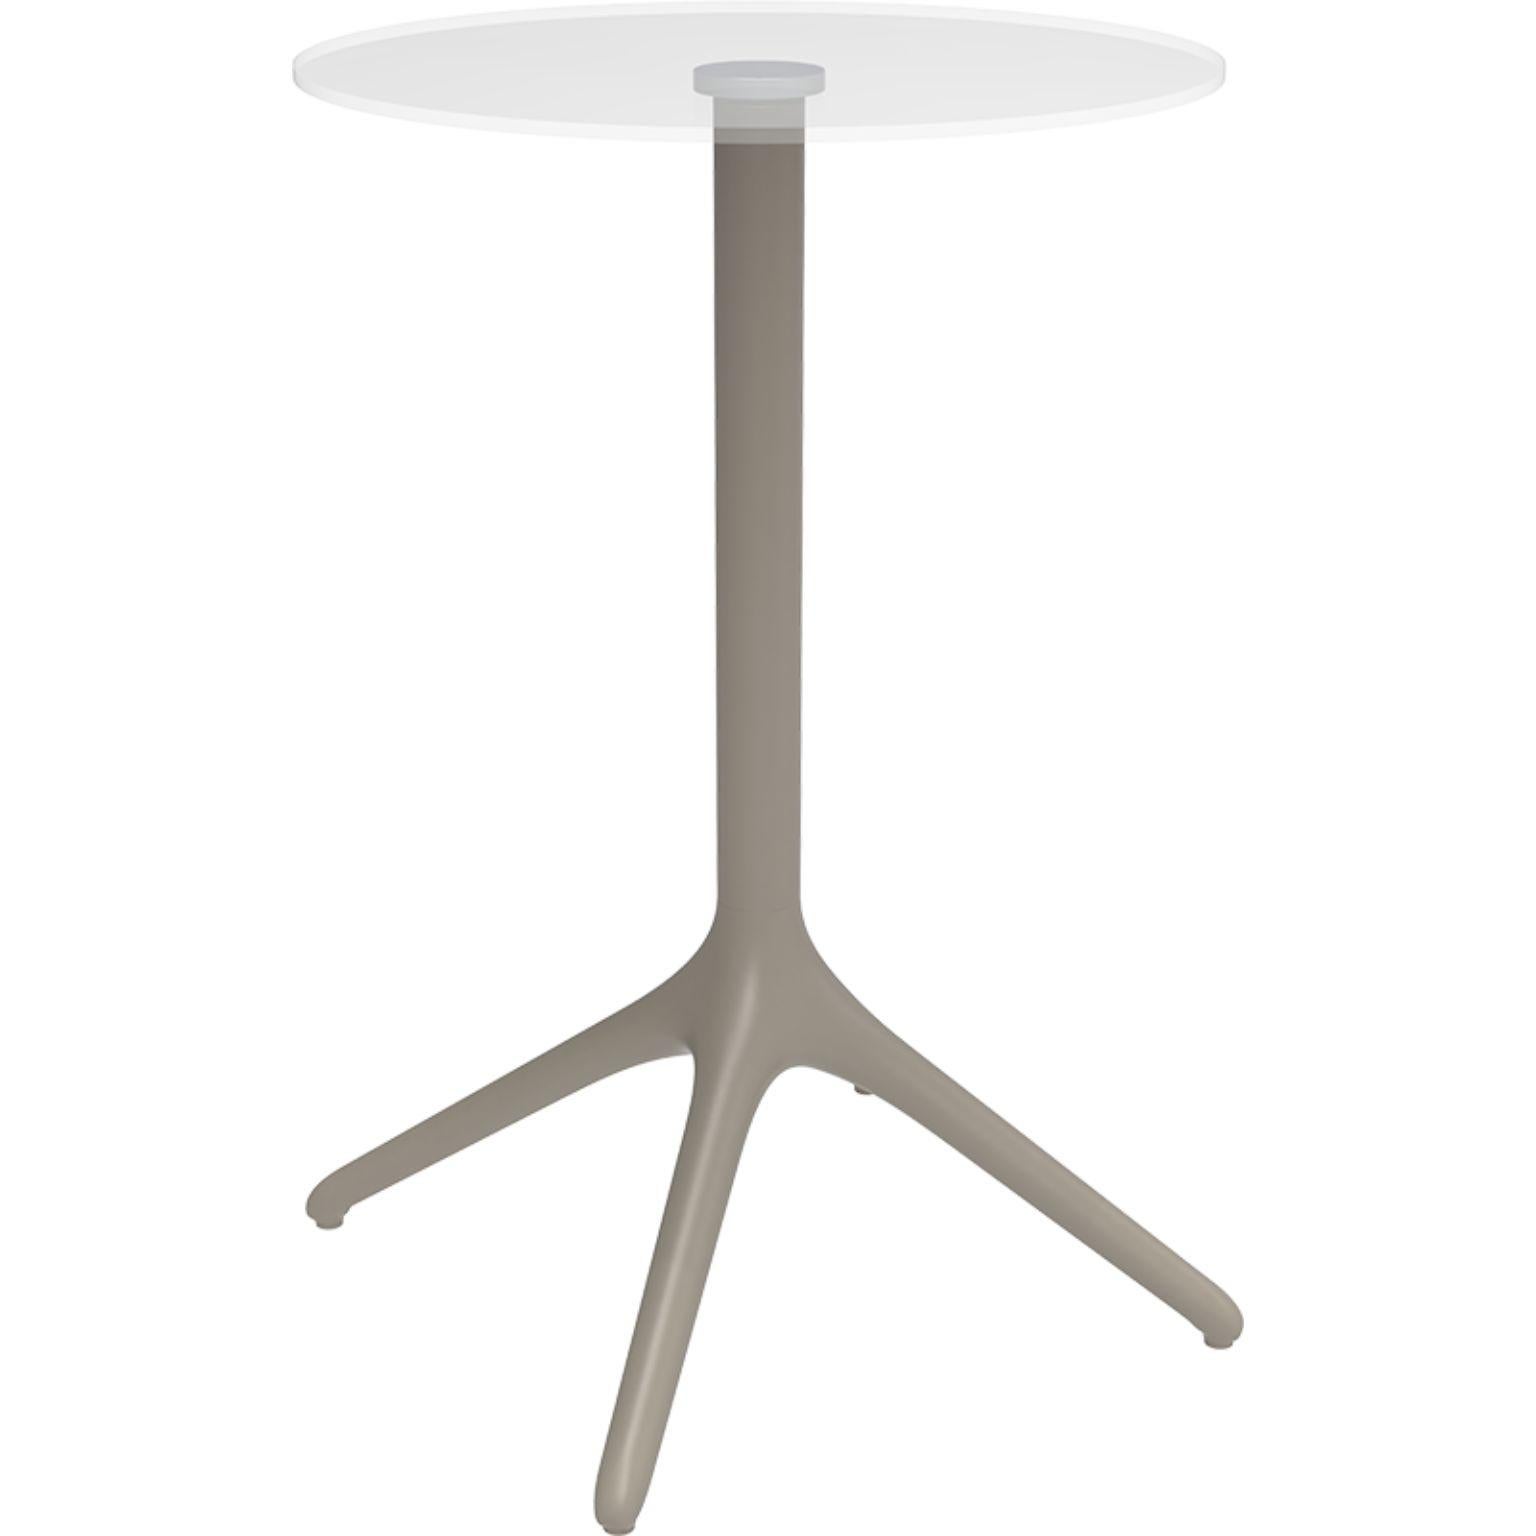 Uni cream table XL 105 by MOWEE
Dimensions: D50 x H105 cm
Material: aluminium, tempered glass
Weight: 9.7 kg
Also available in different colours and finishes. 

A table designed to be as versatile as possible and can coexist with a variety of